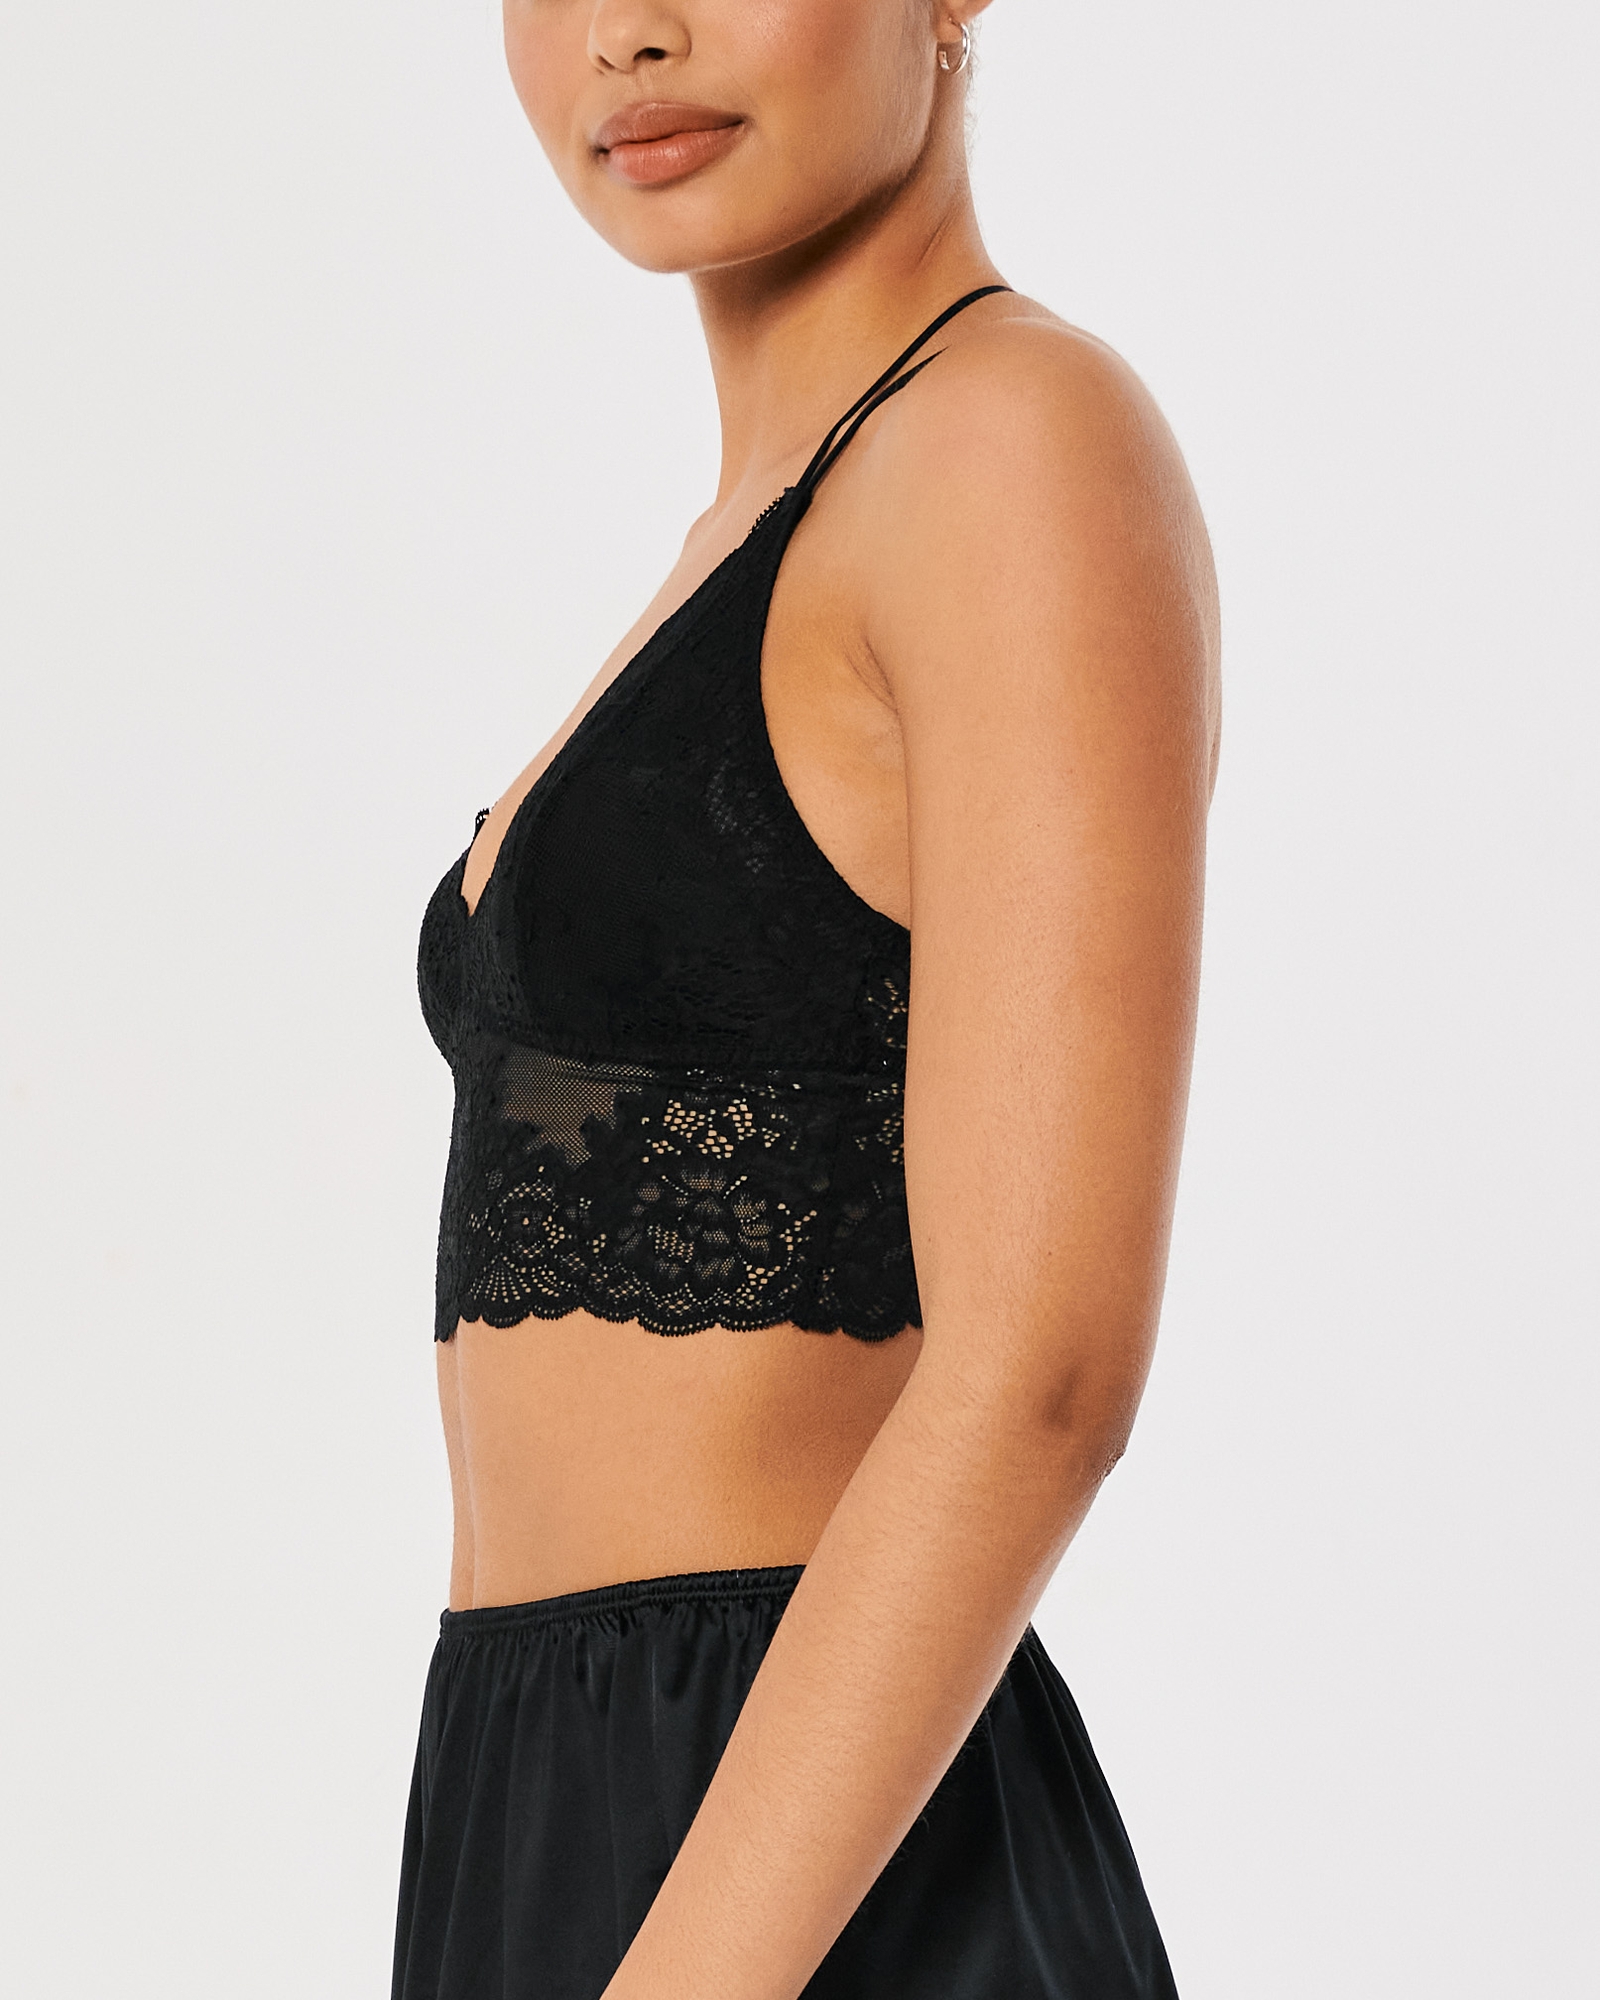 Hollister Gilly Hicks Go Boost Strappy Seamless Longline Sports